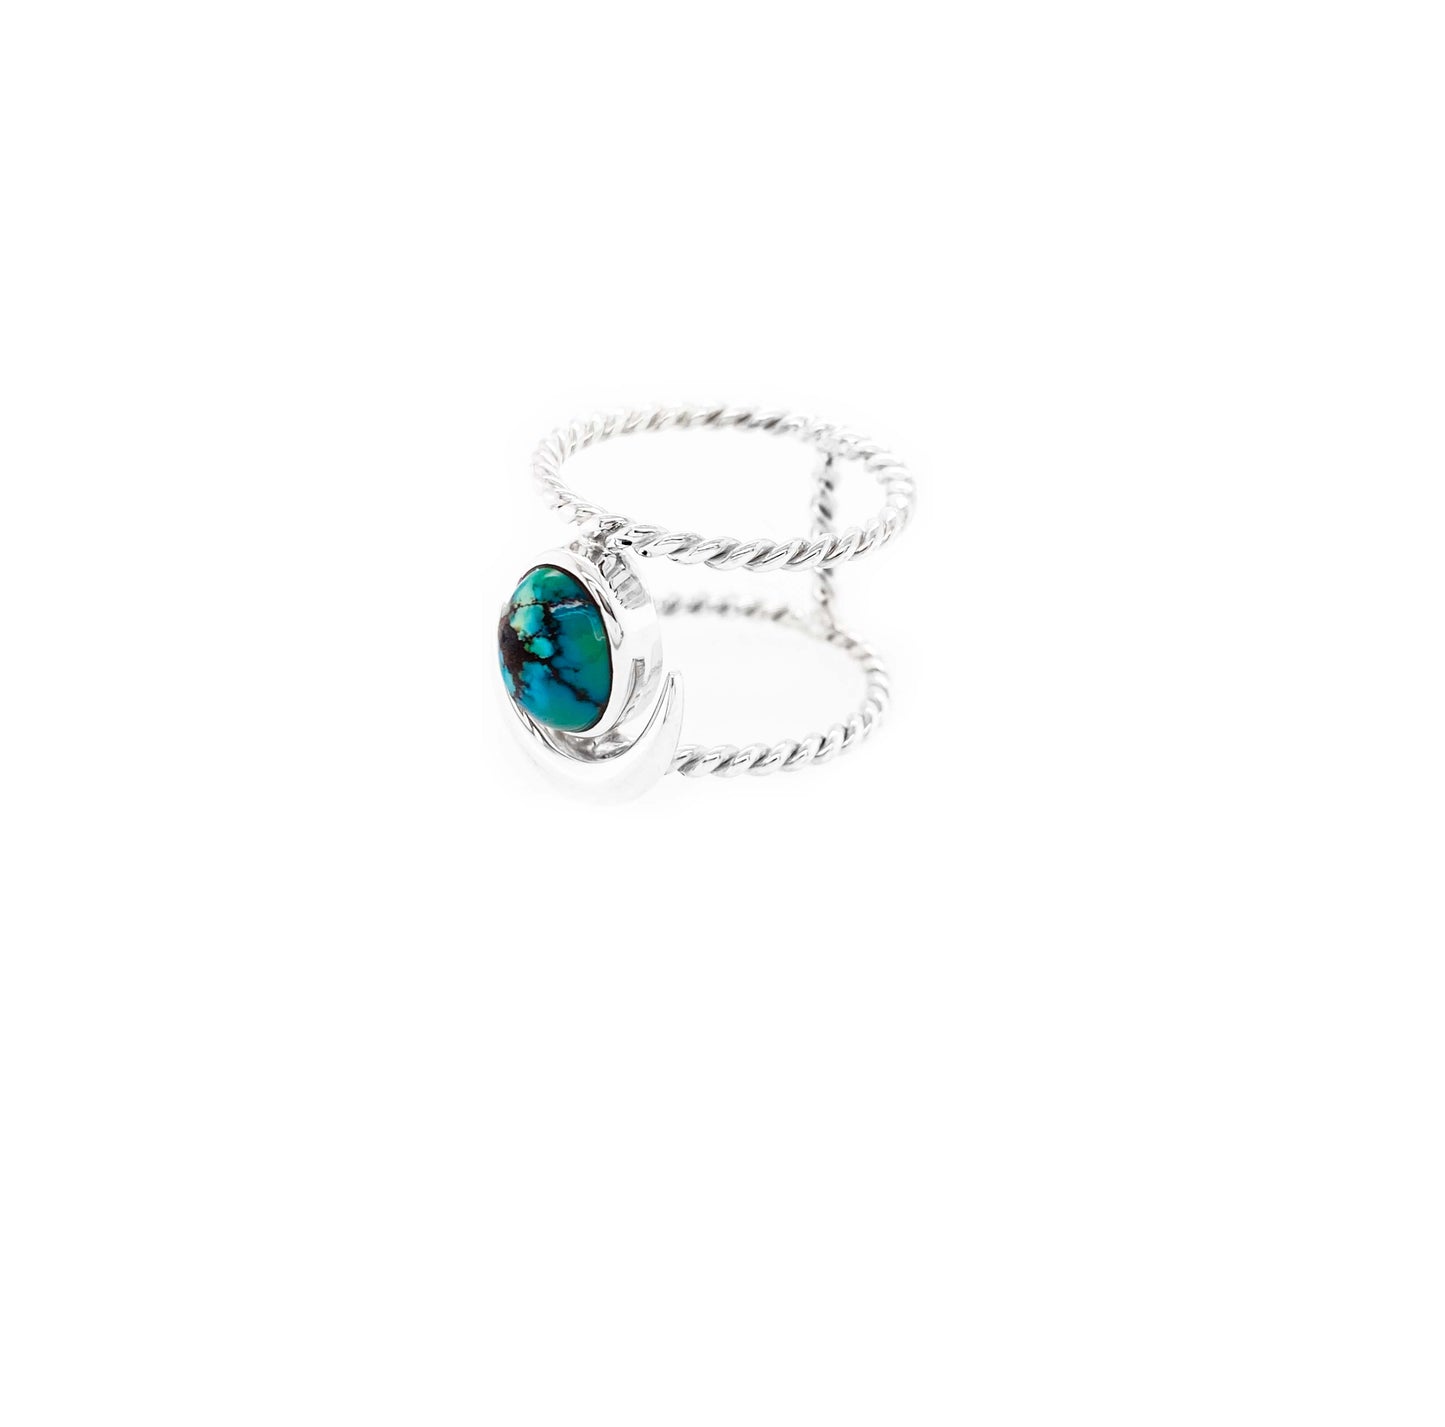 Turquoise Crescent Moon Ring